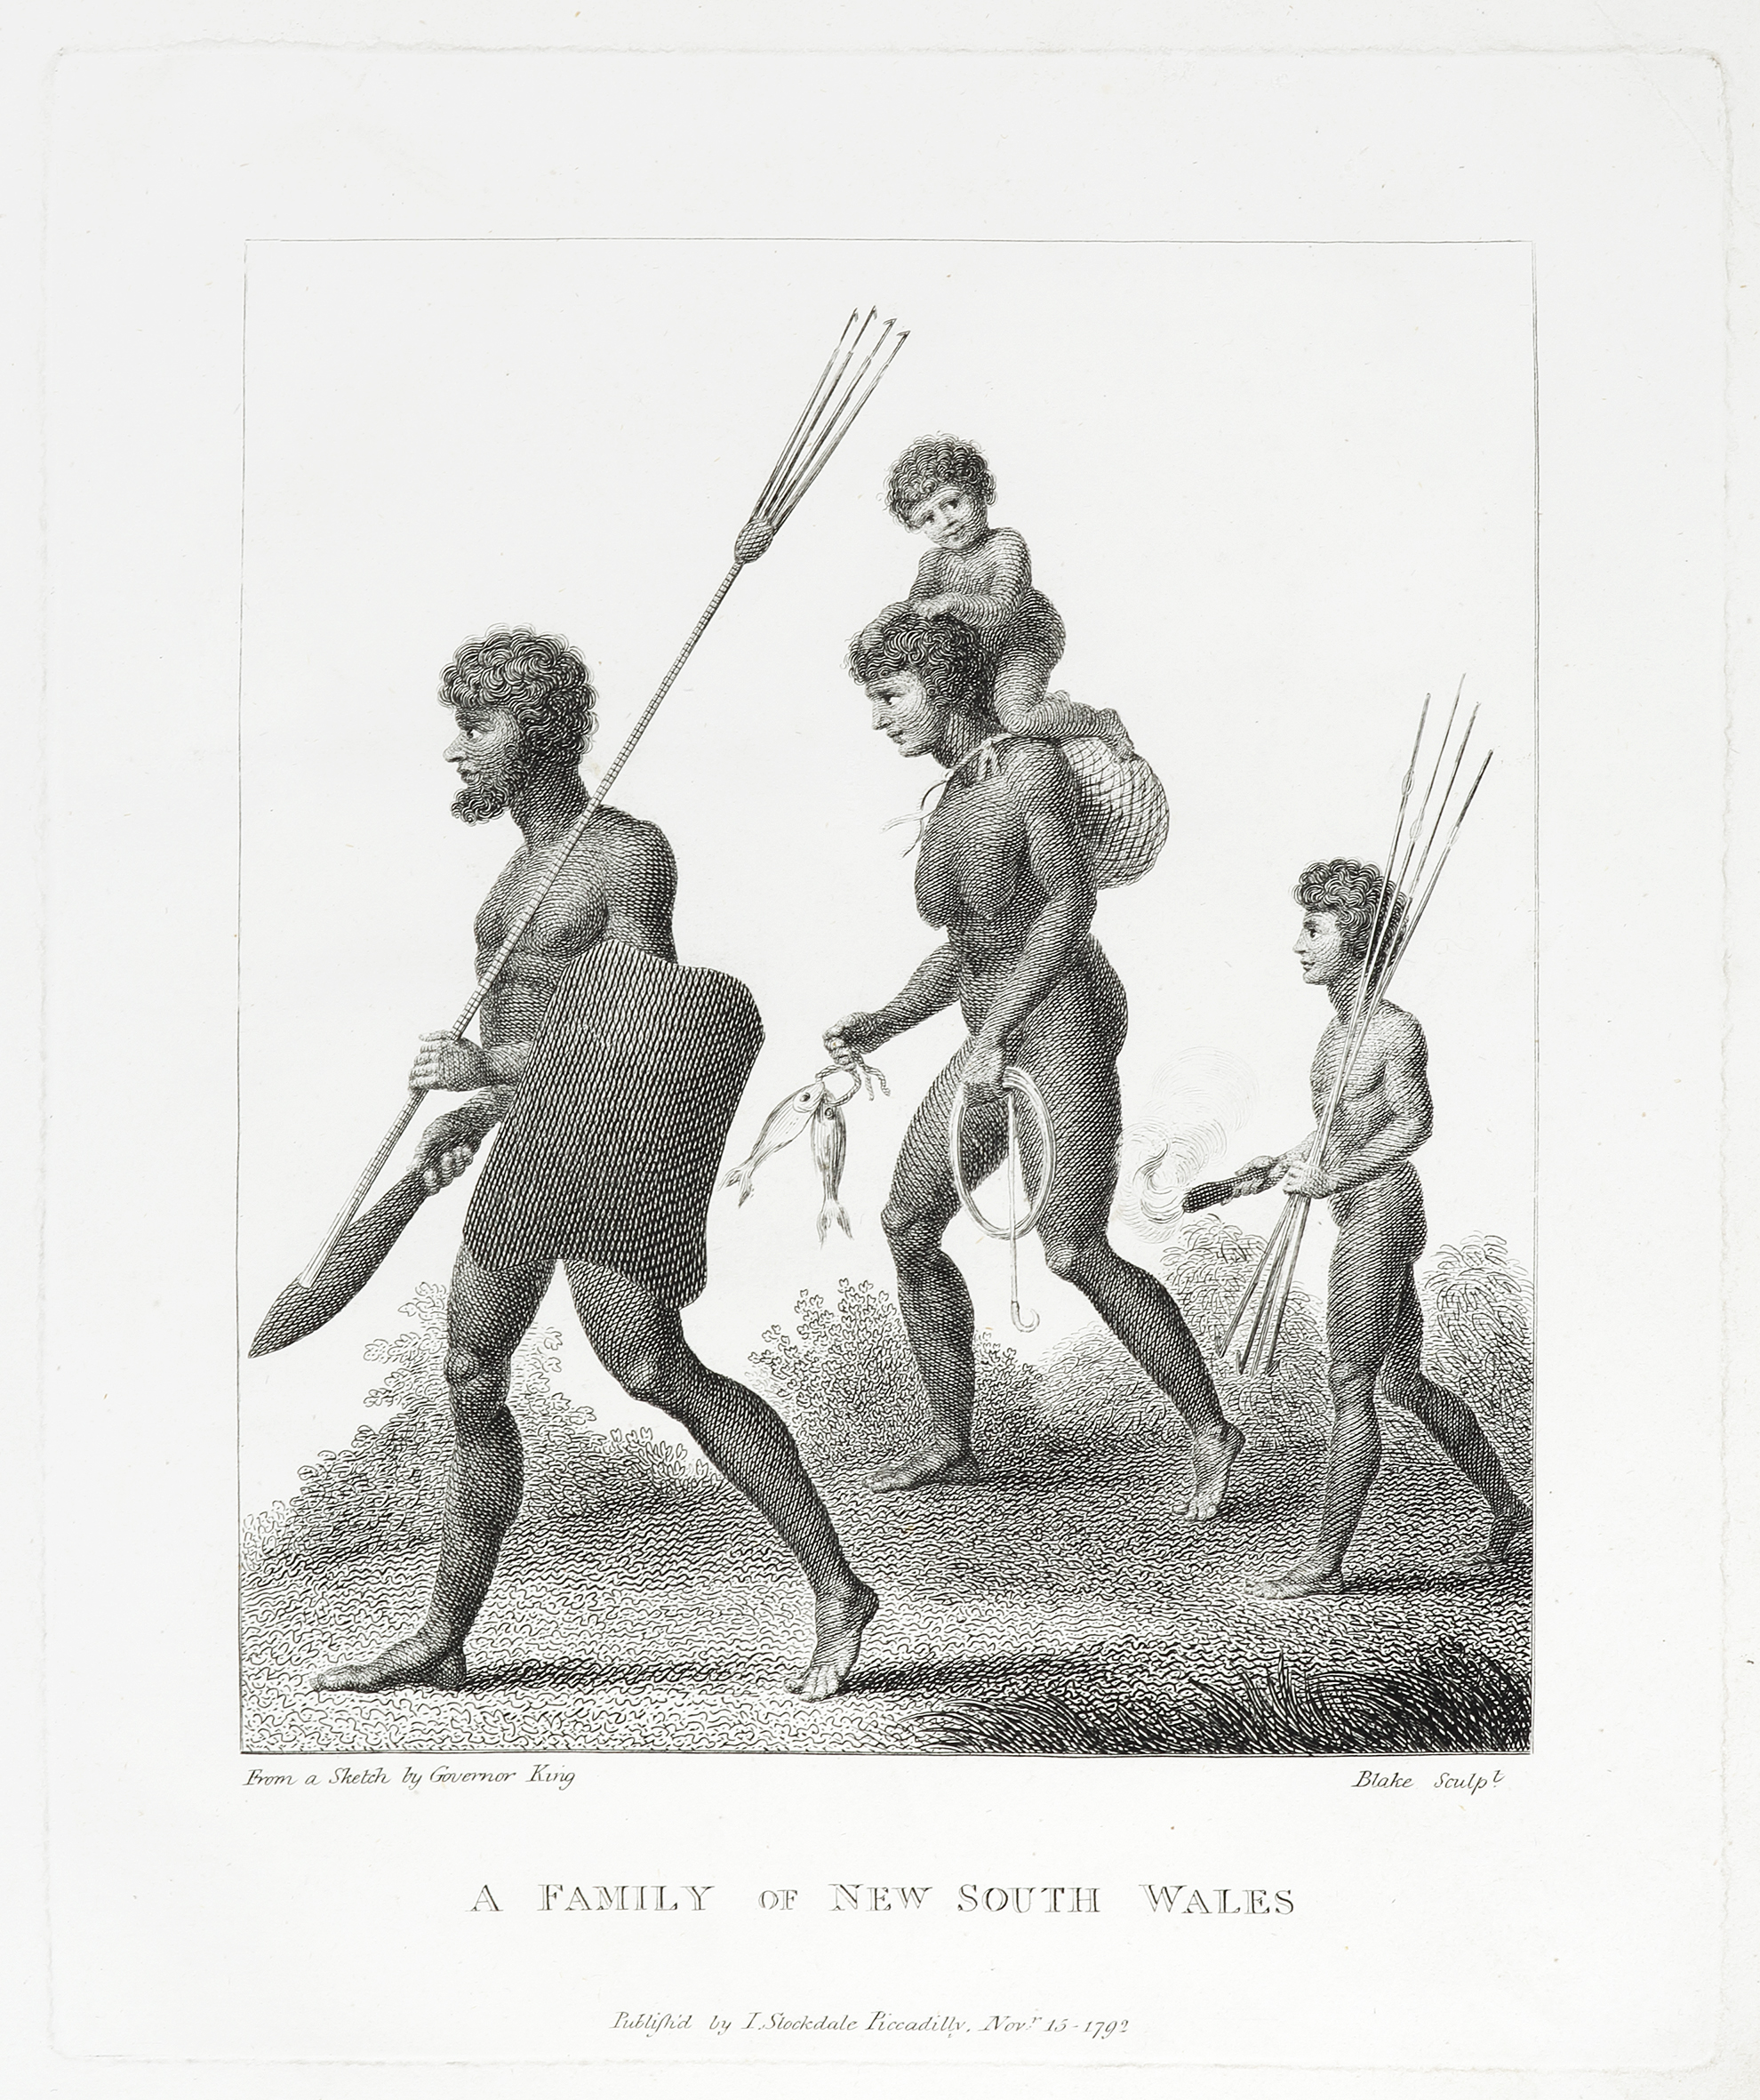 A Family of New South Wales. - Antique Print from 1792